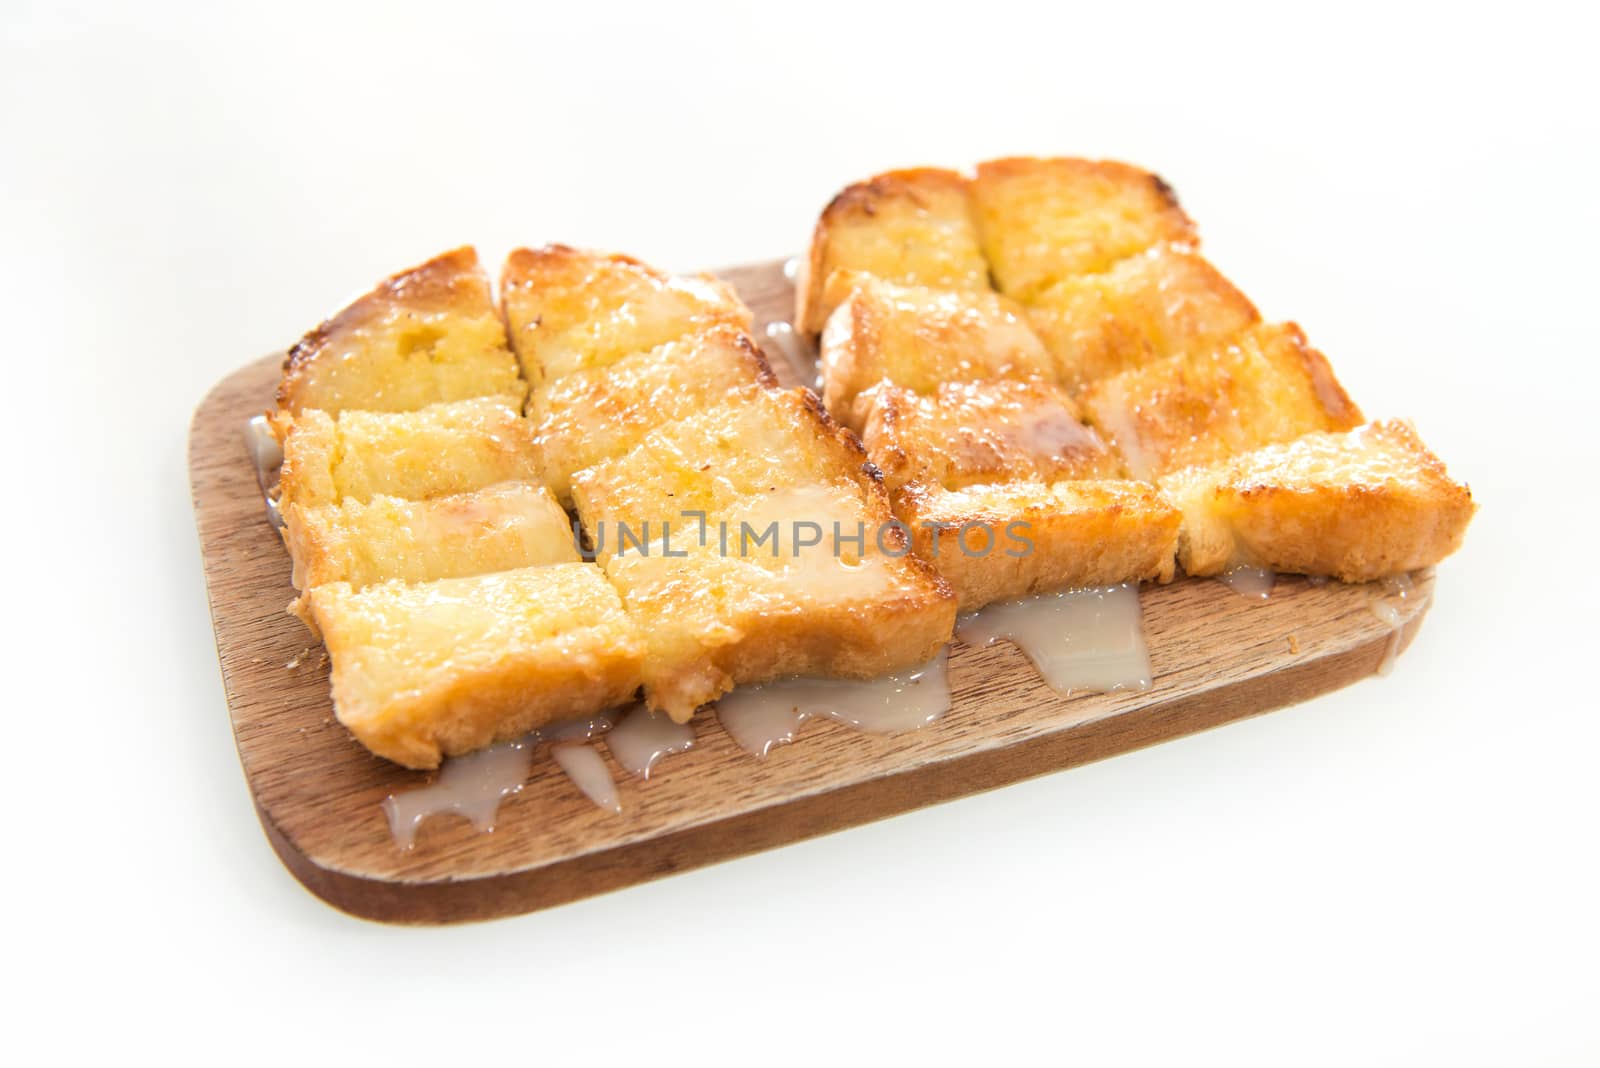 Bread toast and condensed milk on wooden plate by opasstudio